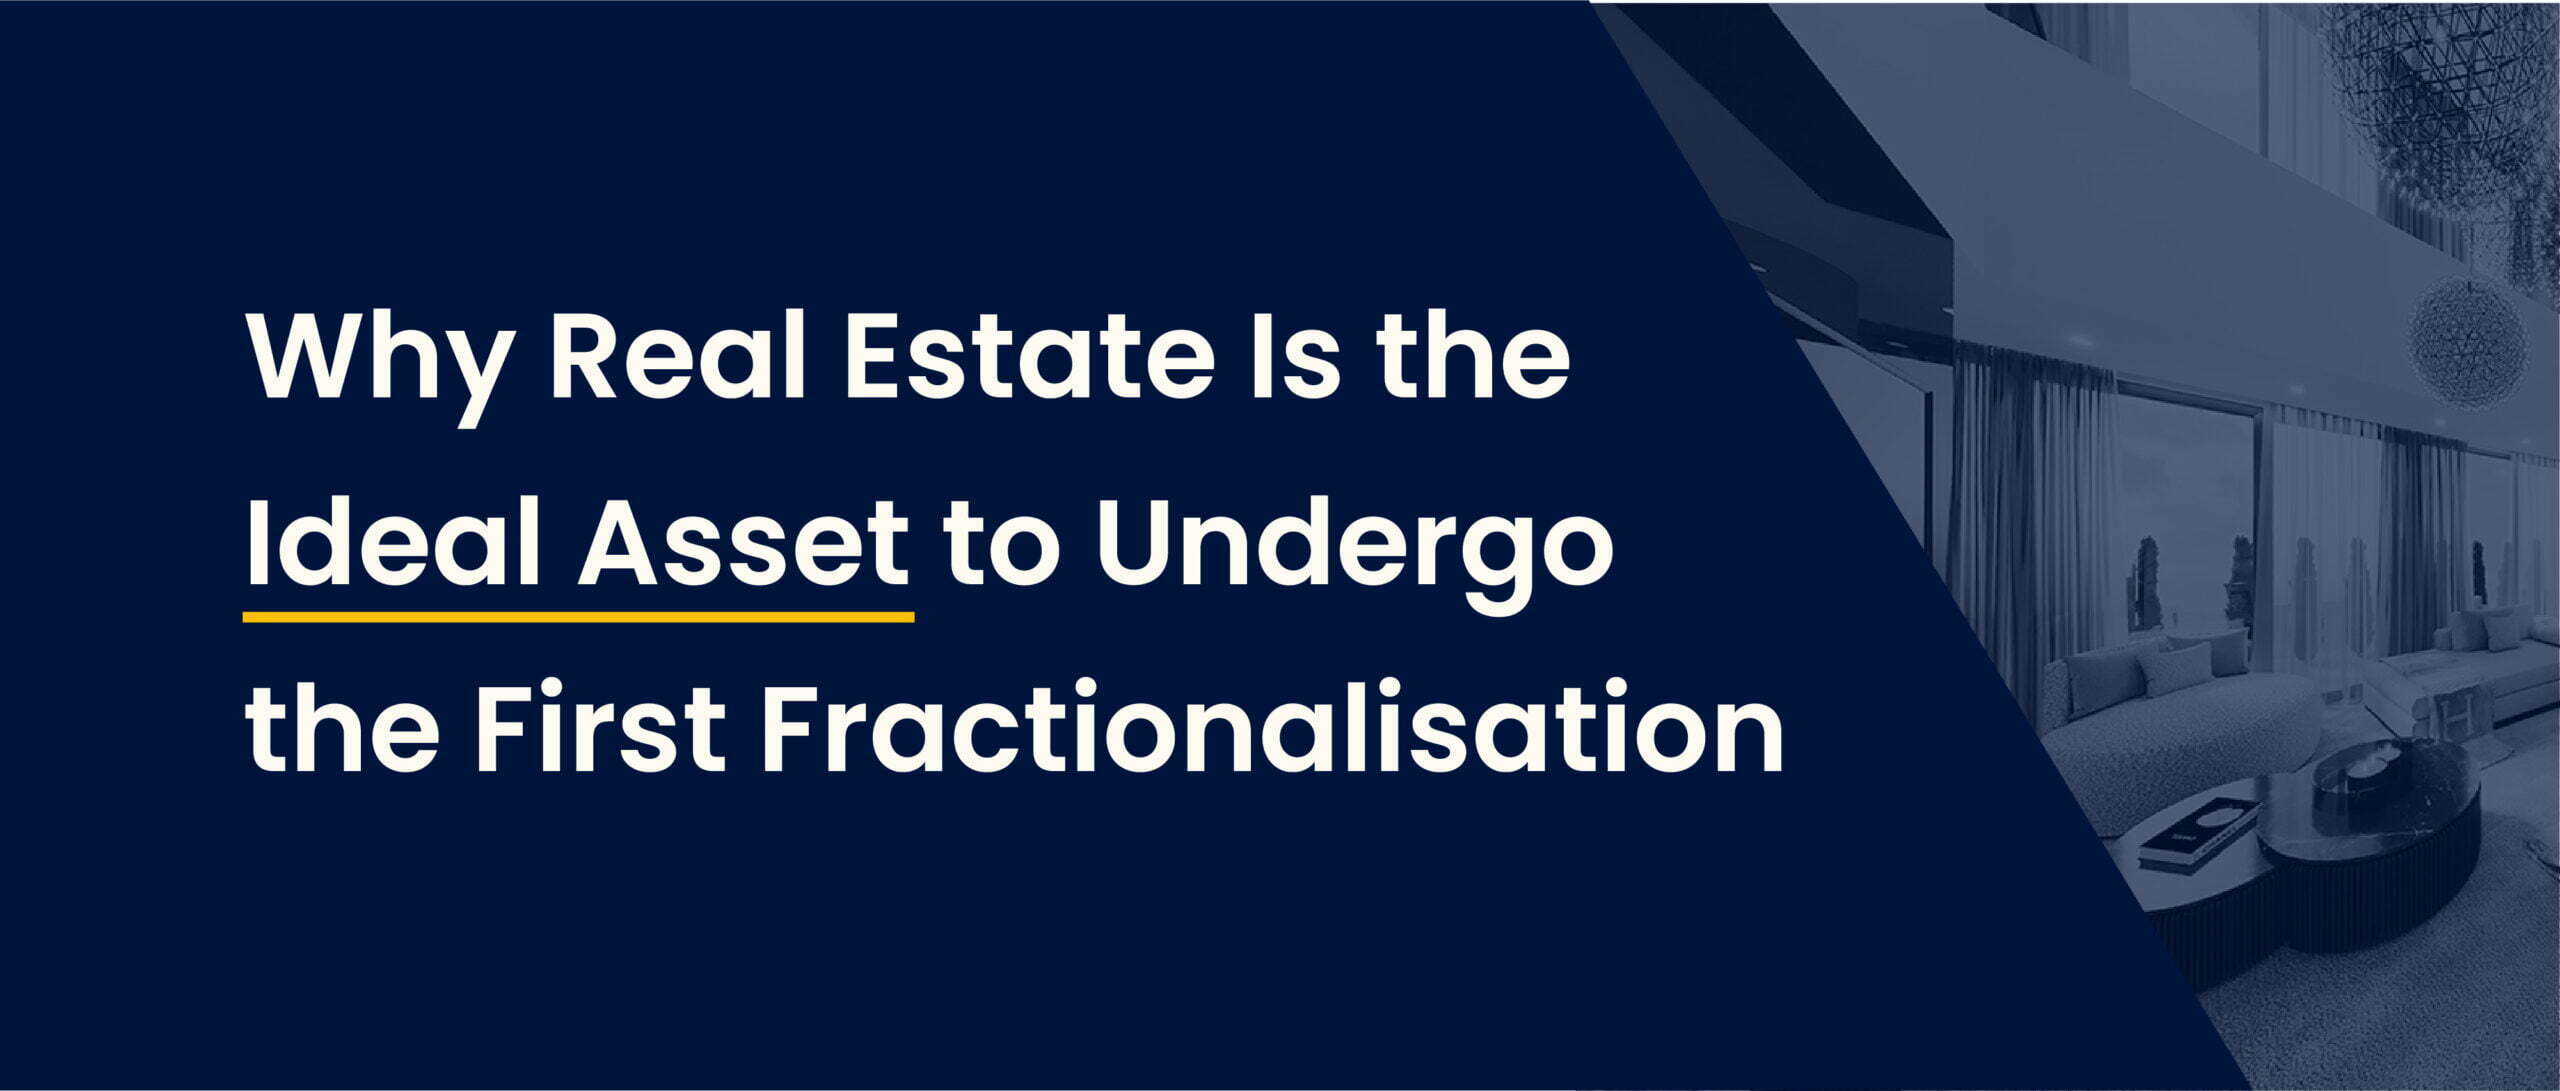 Why Real Estate is the Ideal Asset to Undergo the First Fractionalisation